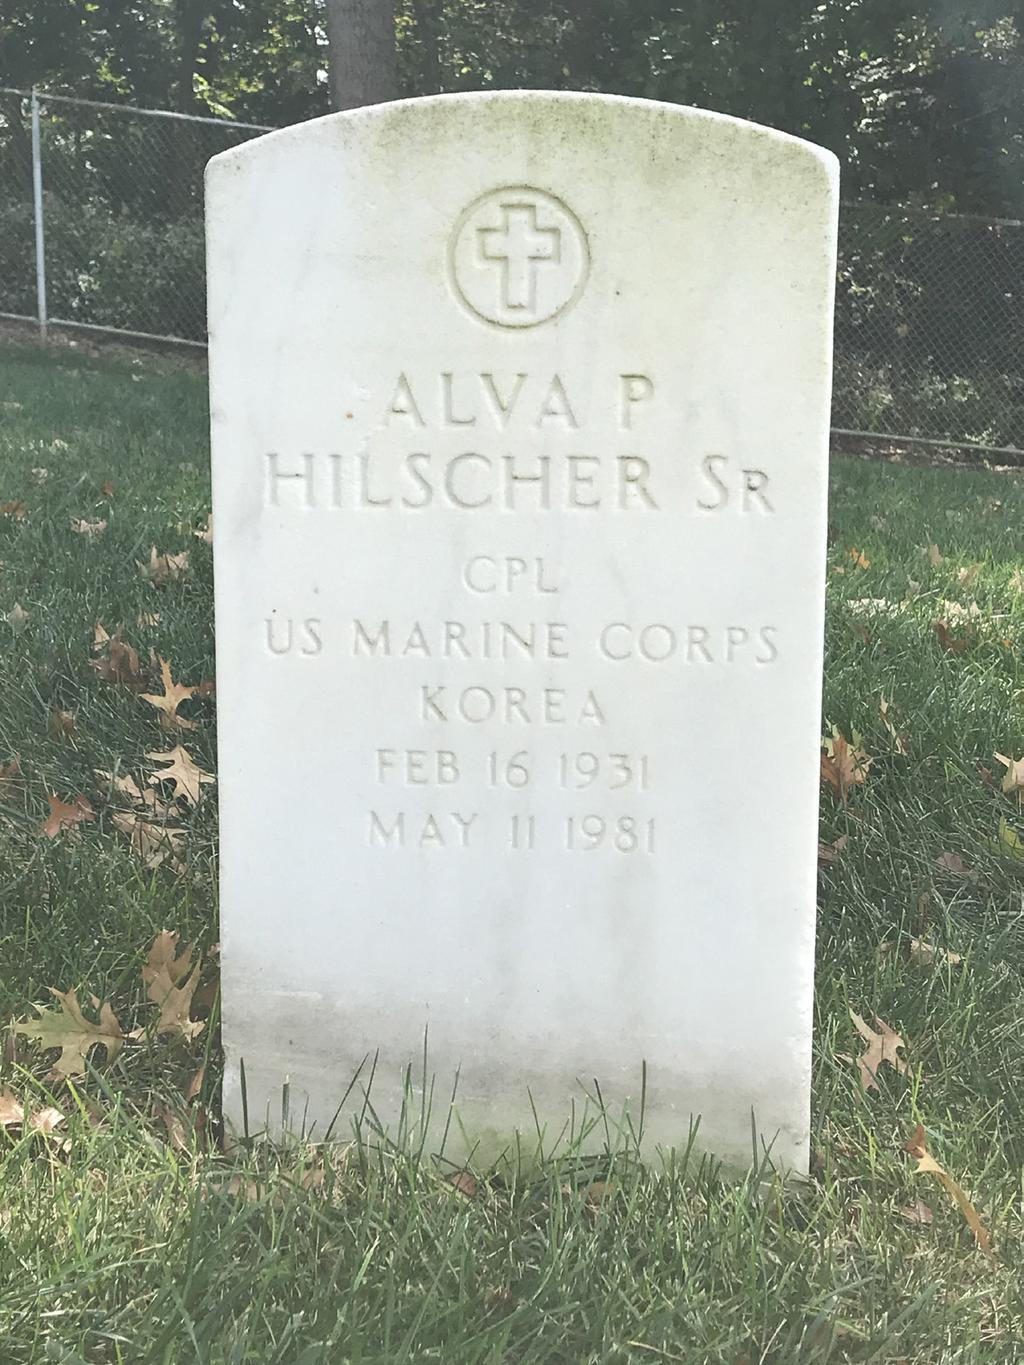 Veteran Experience Profile: Corporal Alva P. Hilscher 3 After returning to Belleville, Illinois in 1952, Hilscher married Patricia Rosemary Boothman.